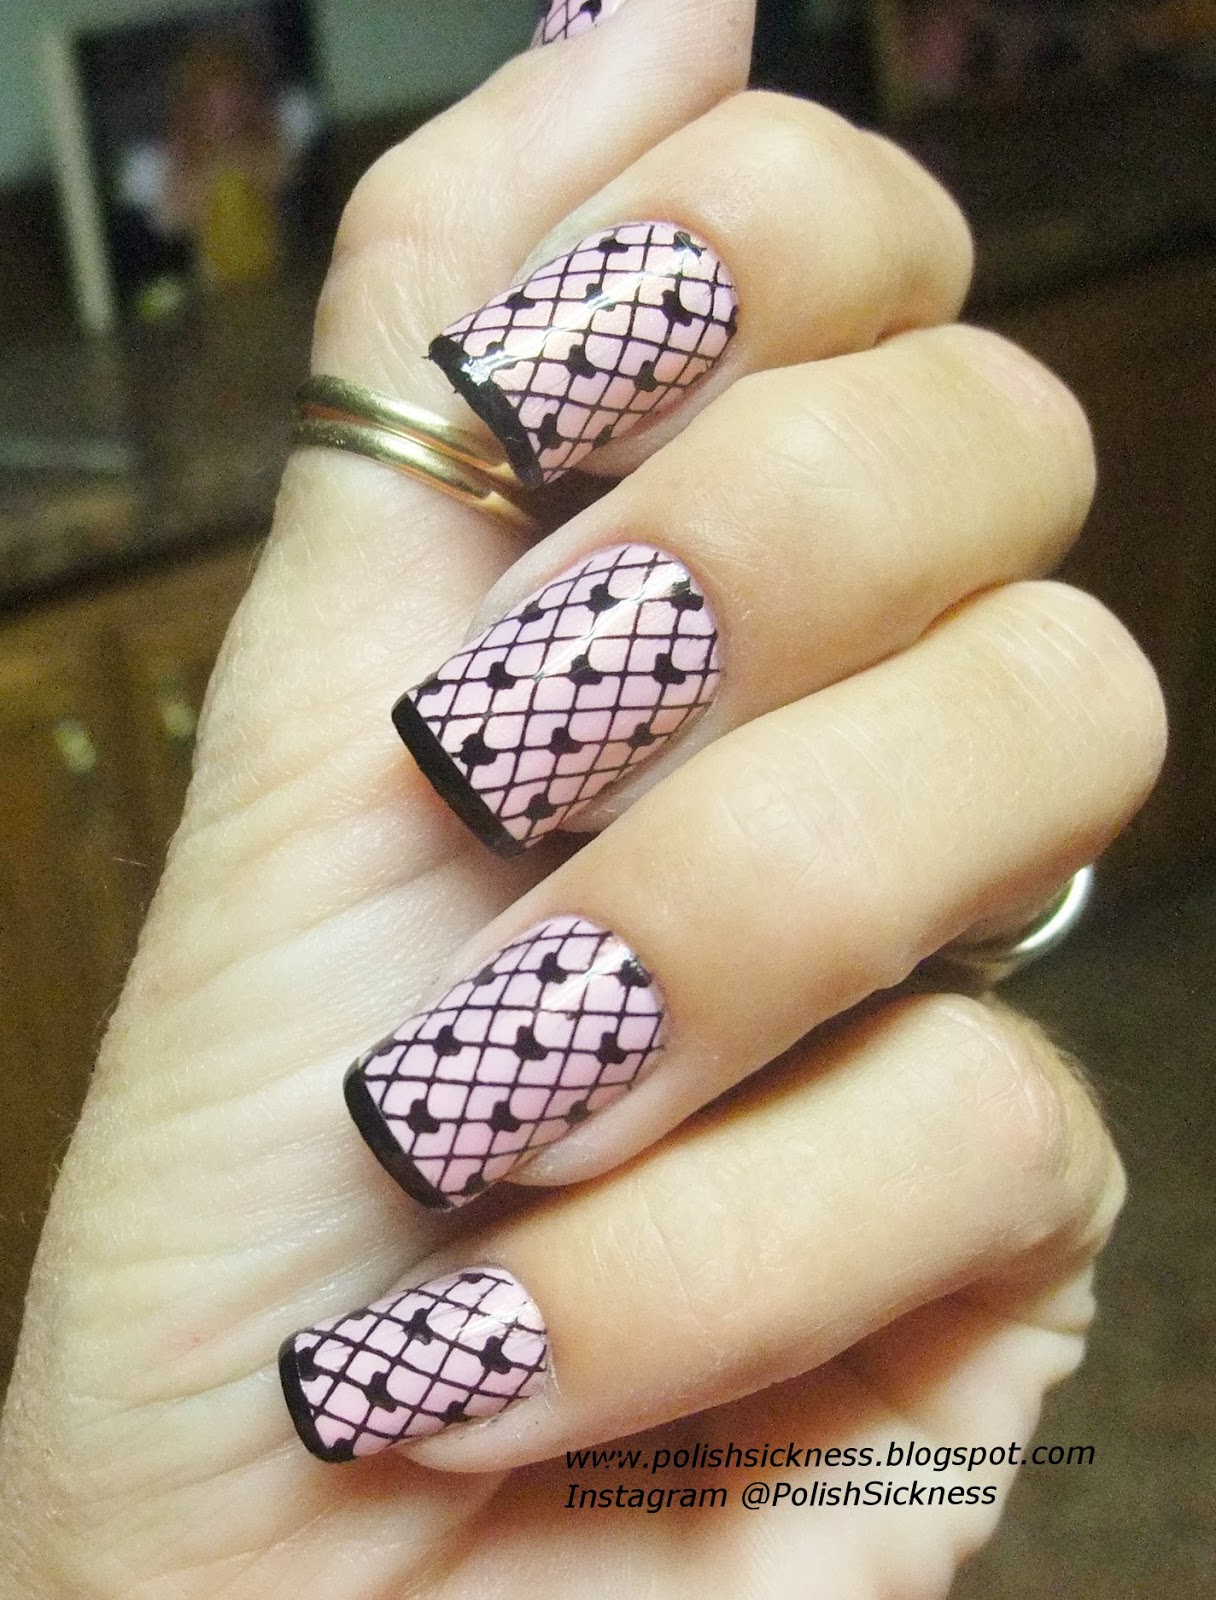 Custom Nail Solutions: Cupid Will Come Calling With These Flirty V-Day ...